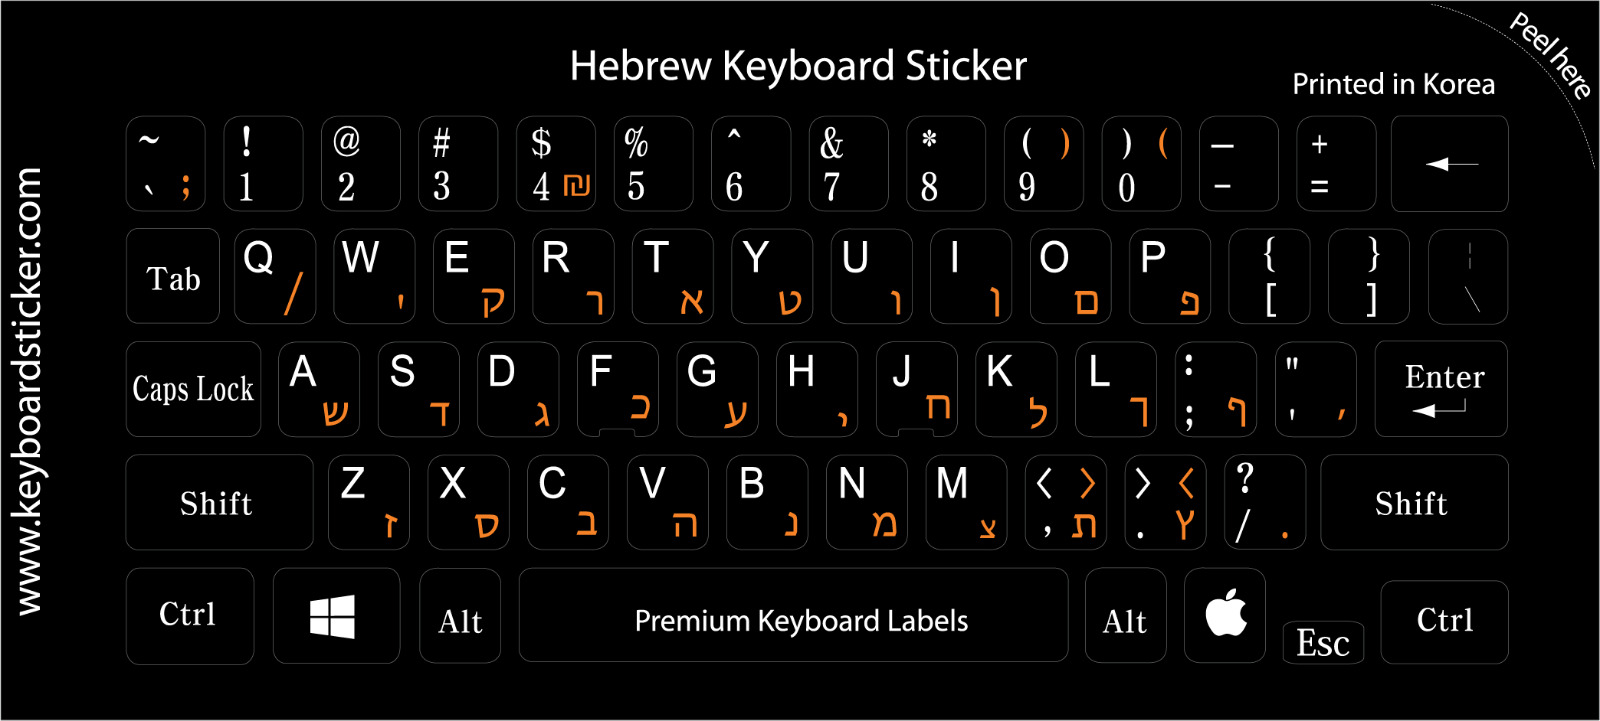 Hebrew Keyboard Sticker 6 VARIOUS COLORS Available PRINTED IN KOREA